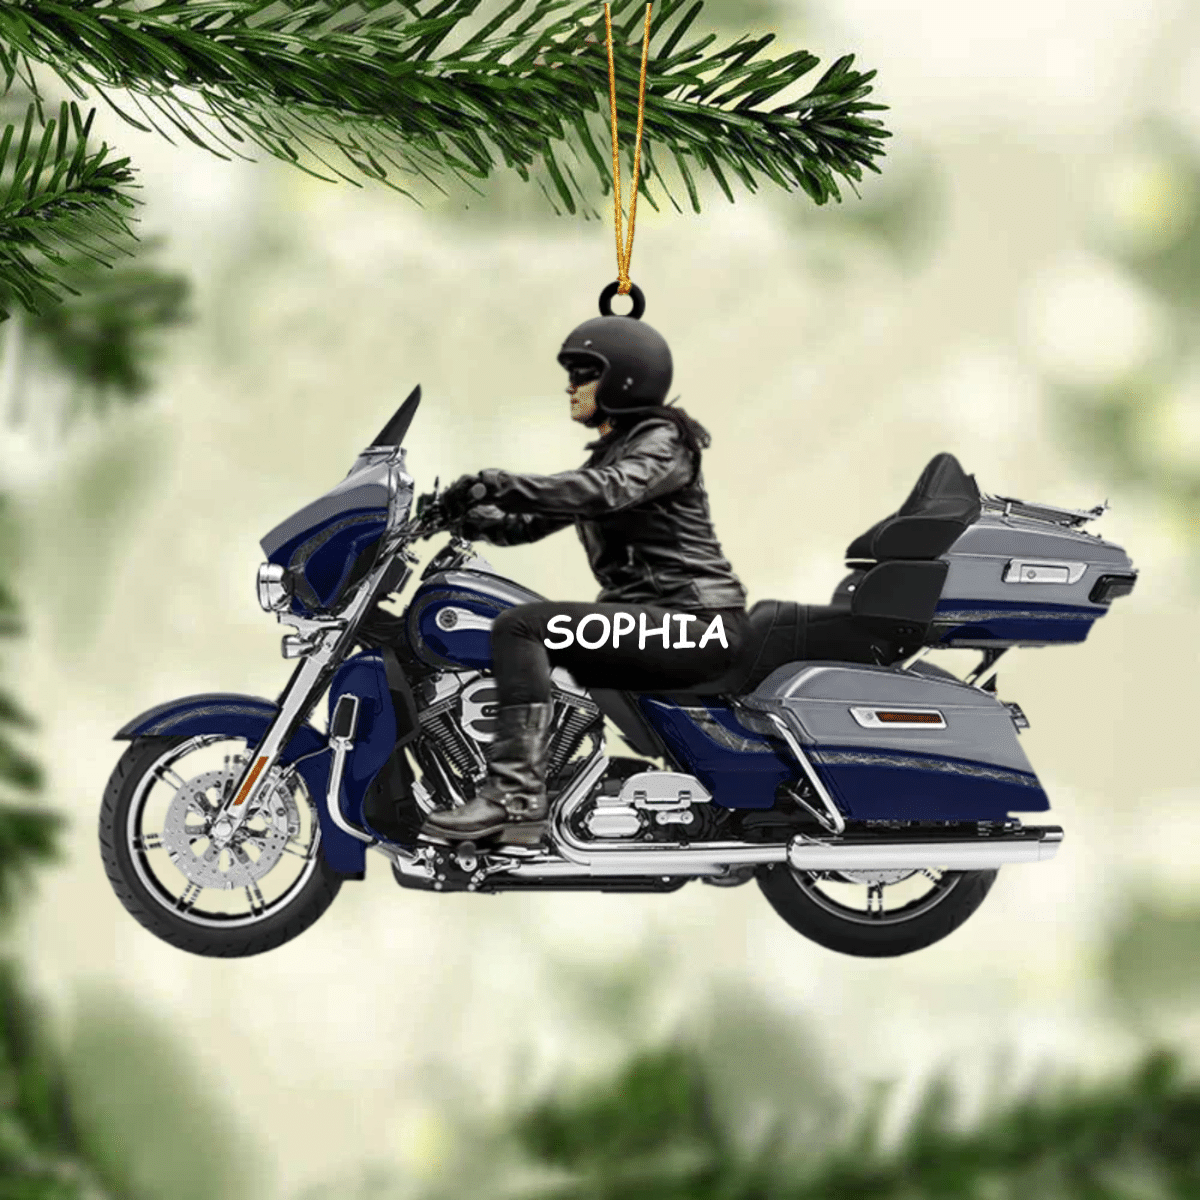 2022 Personalized Biker Woman Harley Motorcycle Christmas Ornament for Biker Gangster Lovers/ Gift for Wife